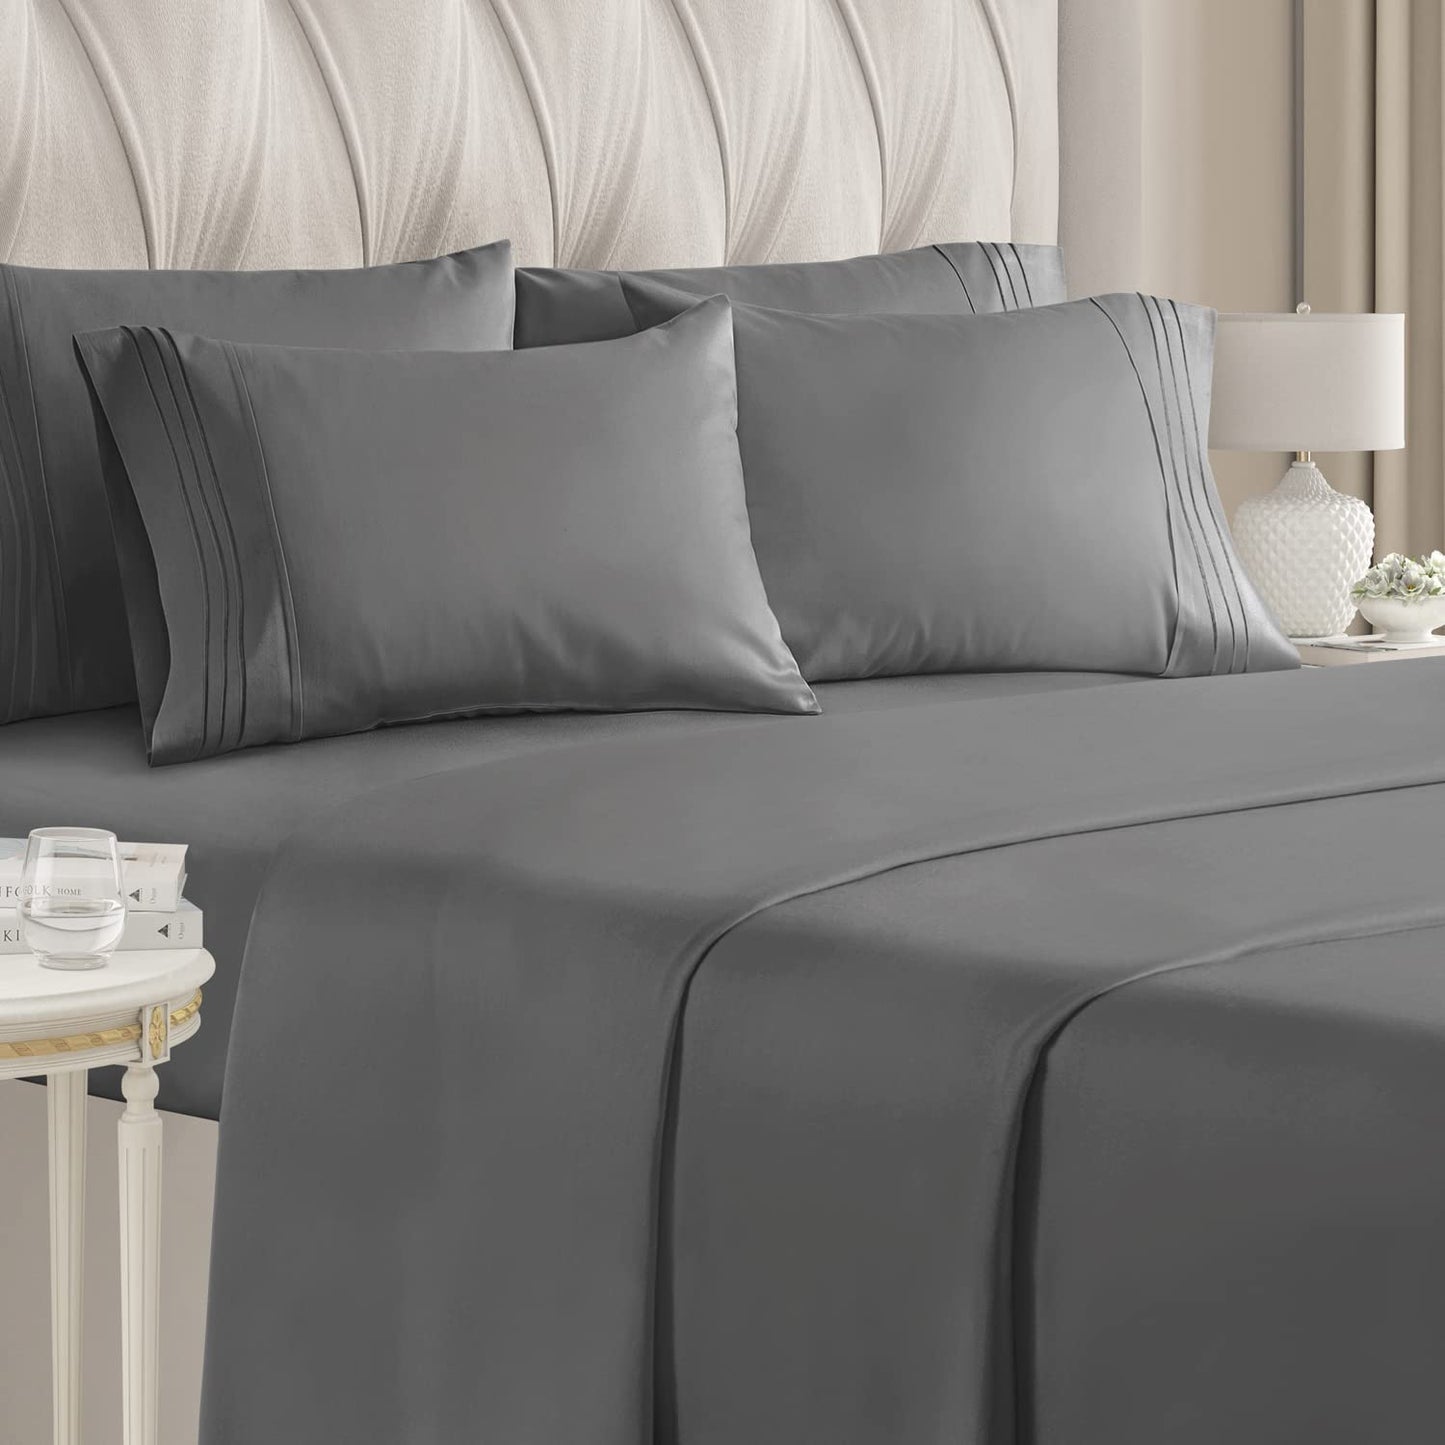 Buy Egyptian Cotton 1000 Thread Count Sateen Stripe Sheet Set King Gray at Egyptianhomelinens.com